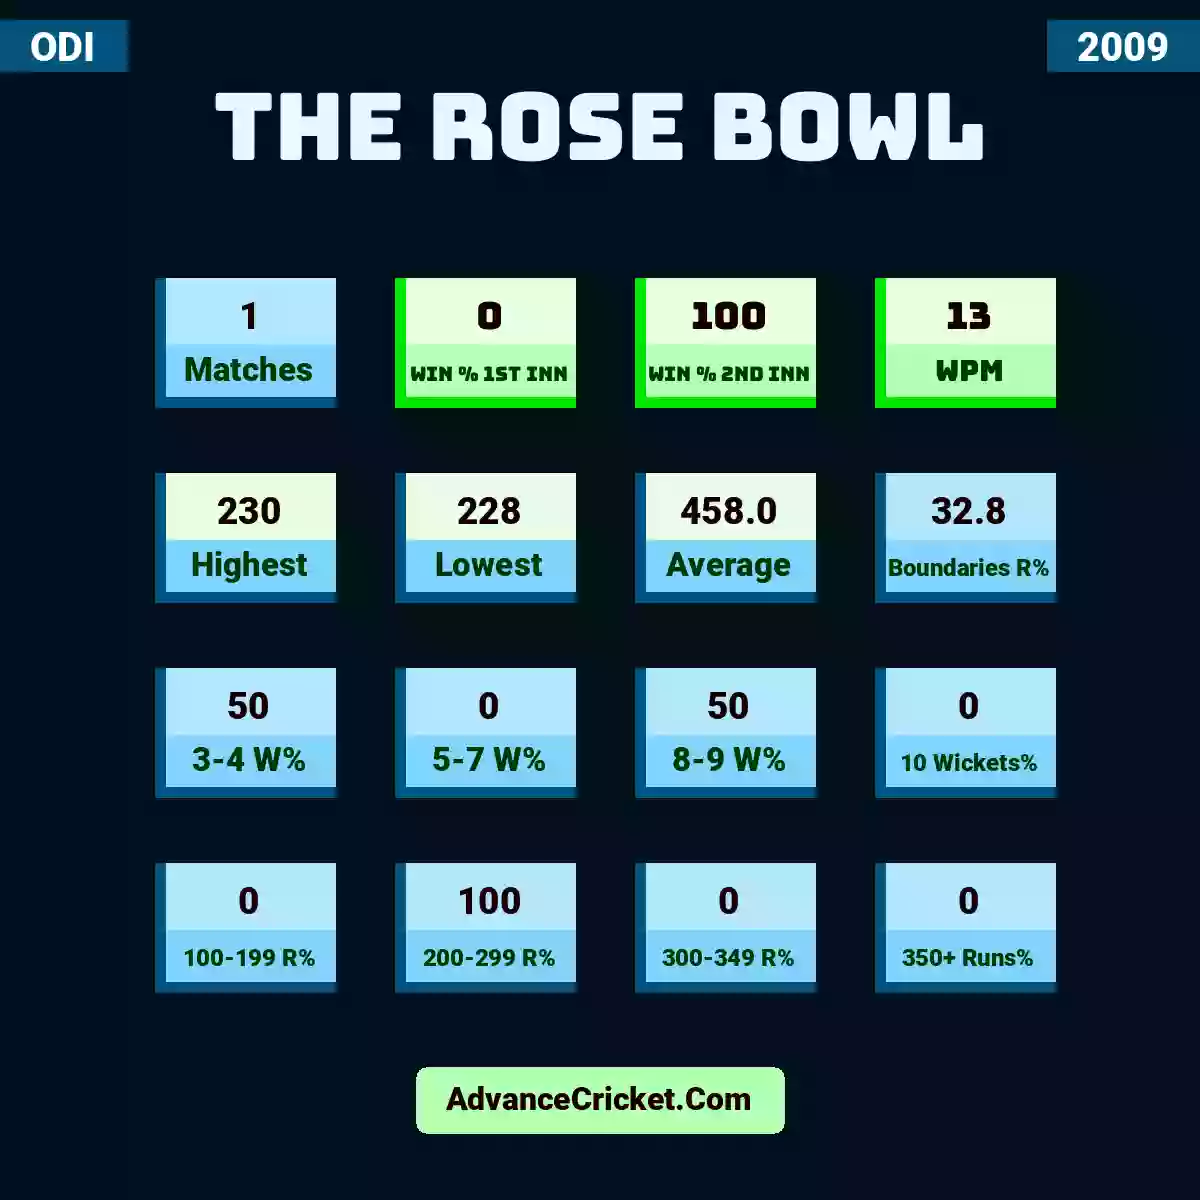 Image showing The Rose Bowl with Matches: 1, Win % 1st Inn: 0, Win % 2nd Inn: 100, WPM: 13, Highest: 230, Lowest: 228, Average: 458.0, Boundaries R%: 32.8, 3-4 W%: 50, 5-7 W%: 0, 8-9 W%: 50, 10 Wickets%: 0, 100-199 R%: 0, 200-299 R%: 100, 300-349 R%: 0, 350+ Runs%: 0.